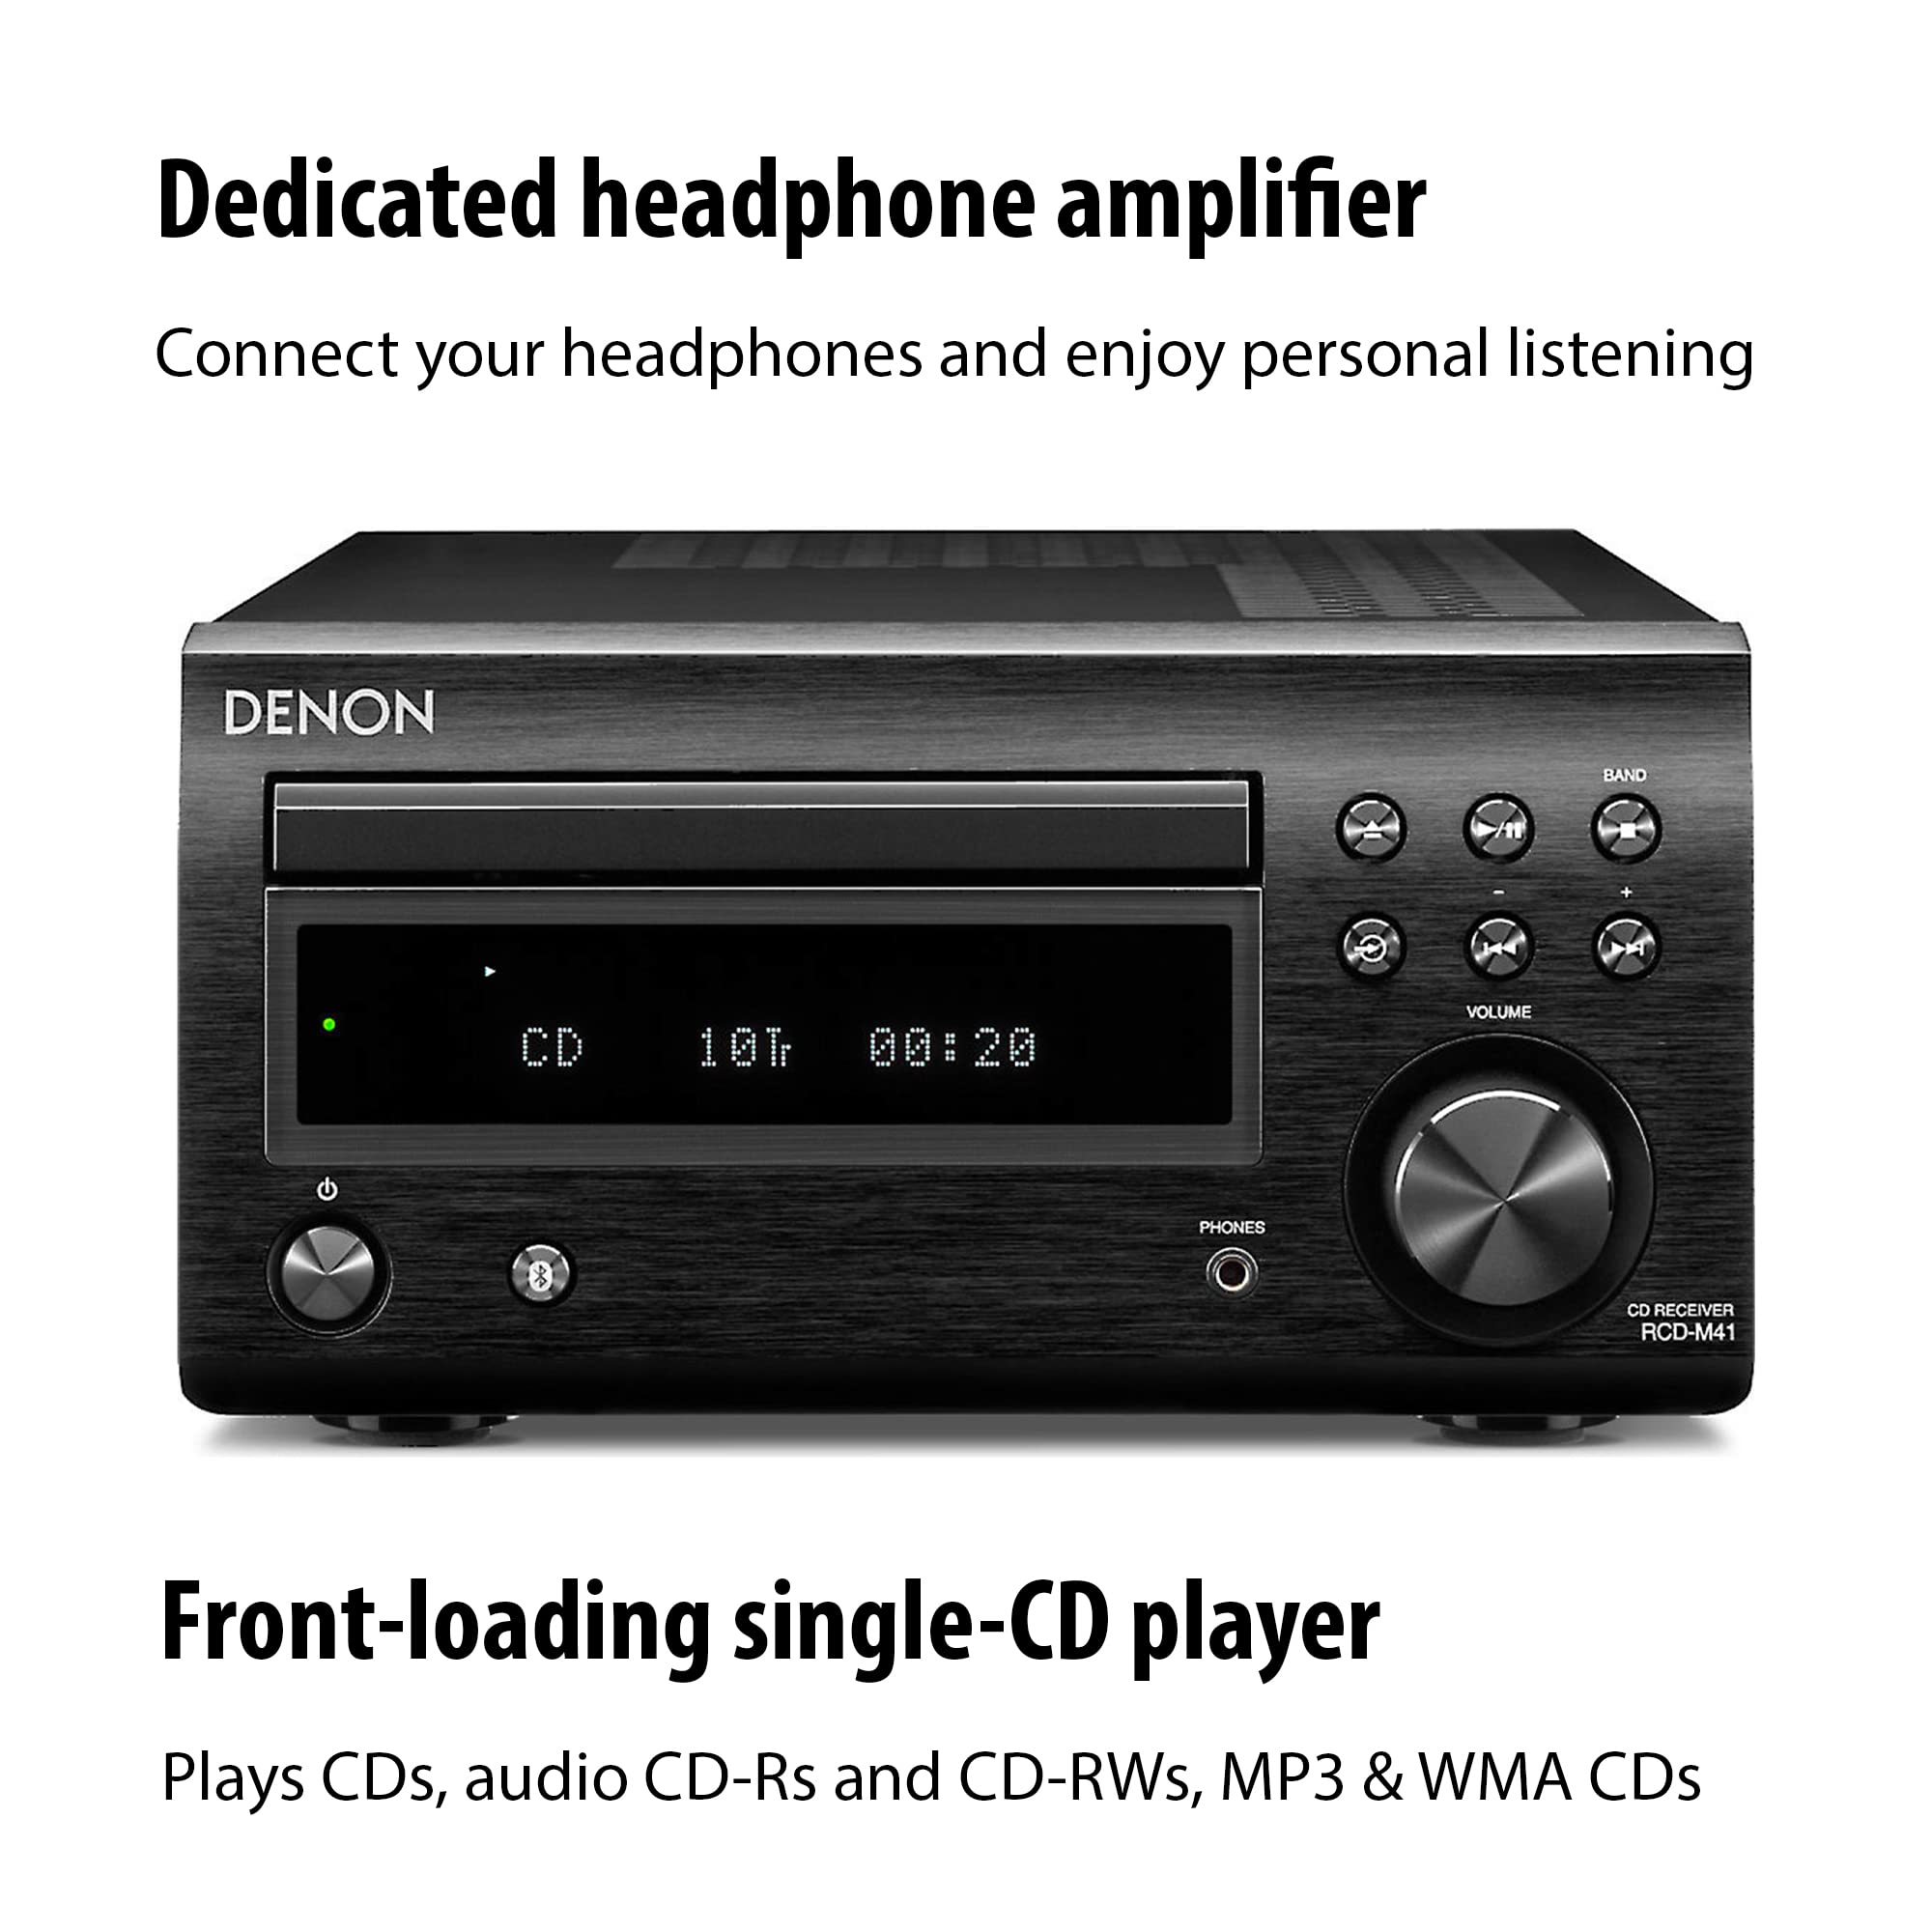 Denon D-M41 Home Theater Mini Amplifier and Bookshelf Speaker Pair - Compact HiFi Stereo System with CD, FM/AM Tuner and Wireless Bluetooth Music | Perfect for Small Rooms and Home Cinema